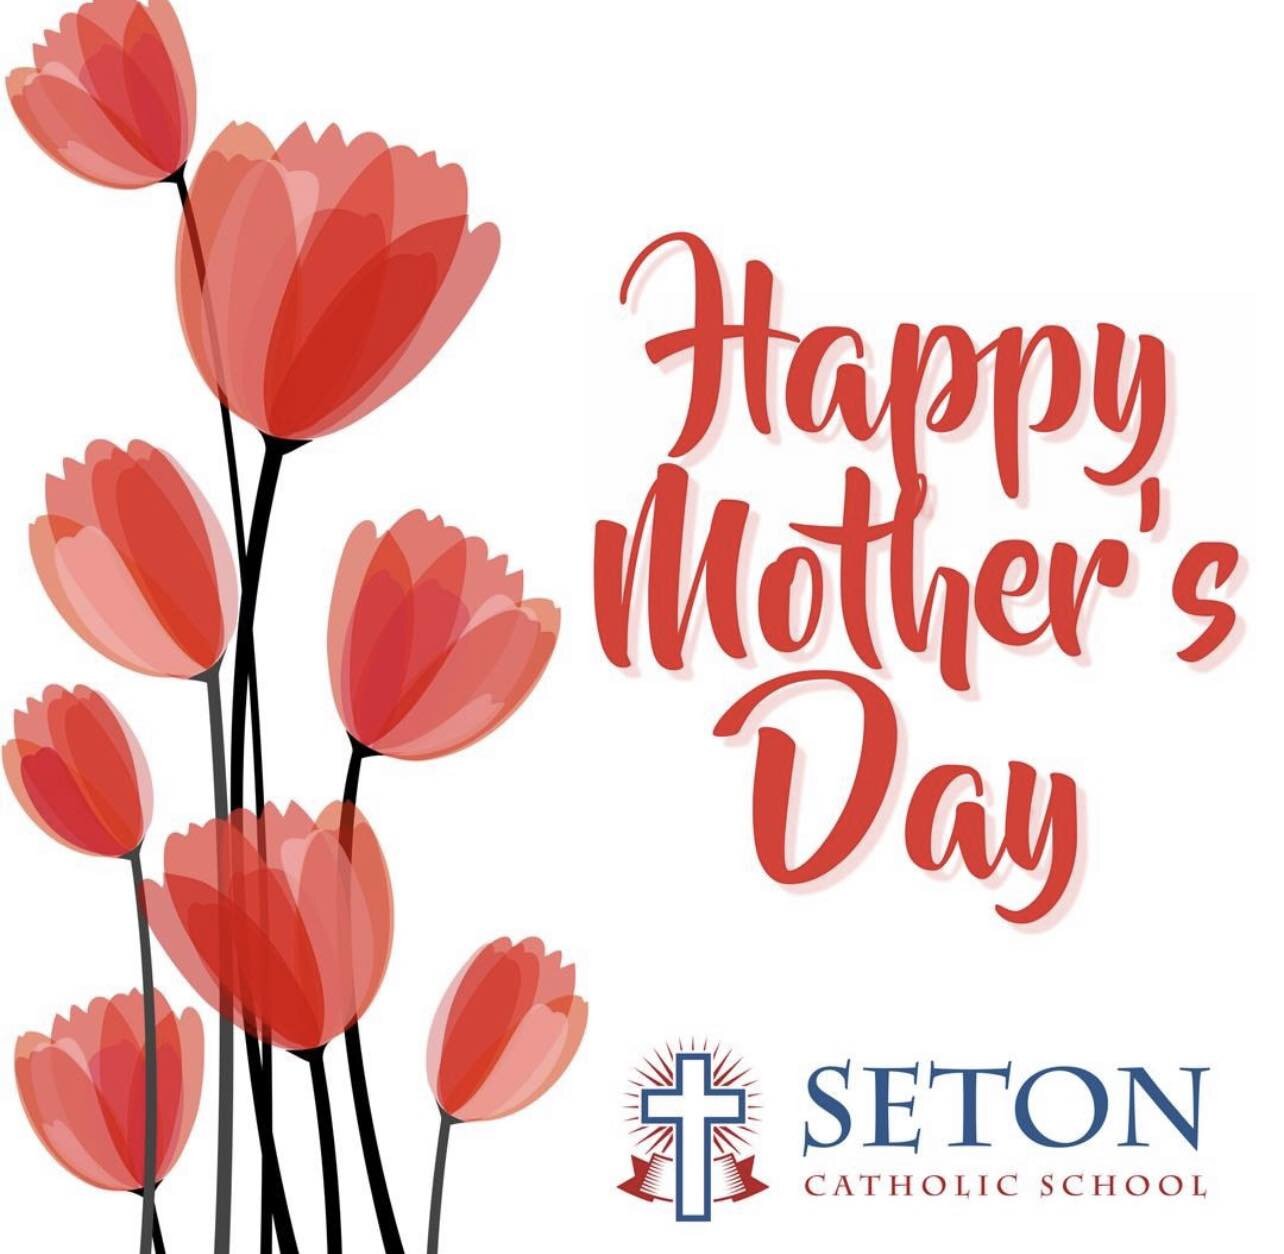 Happy Mother&rsquo;s Day to all of our wonderful Seton moms!